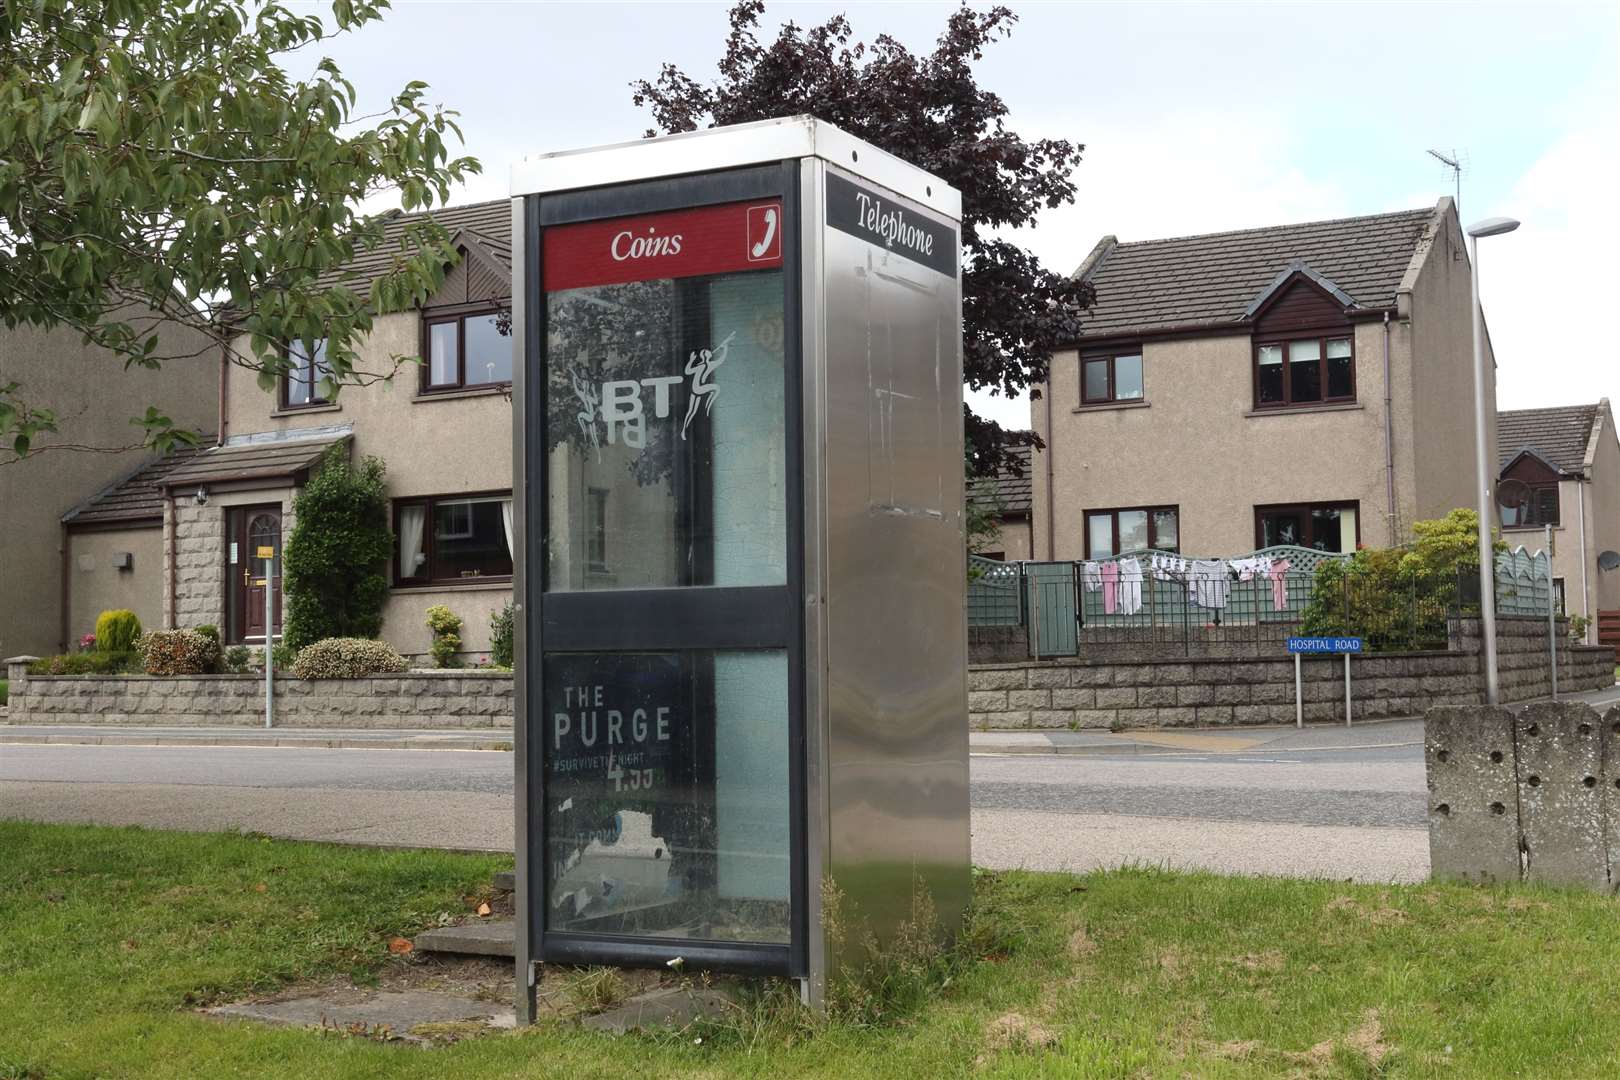 The Modley Place phonebox is one of only a handfull left in Aberdeenshire.